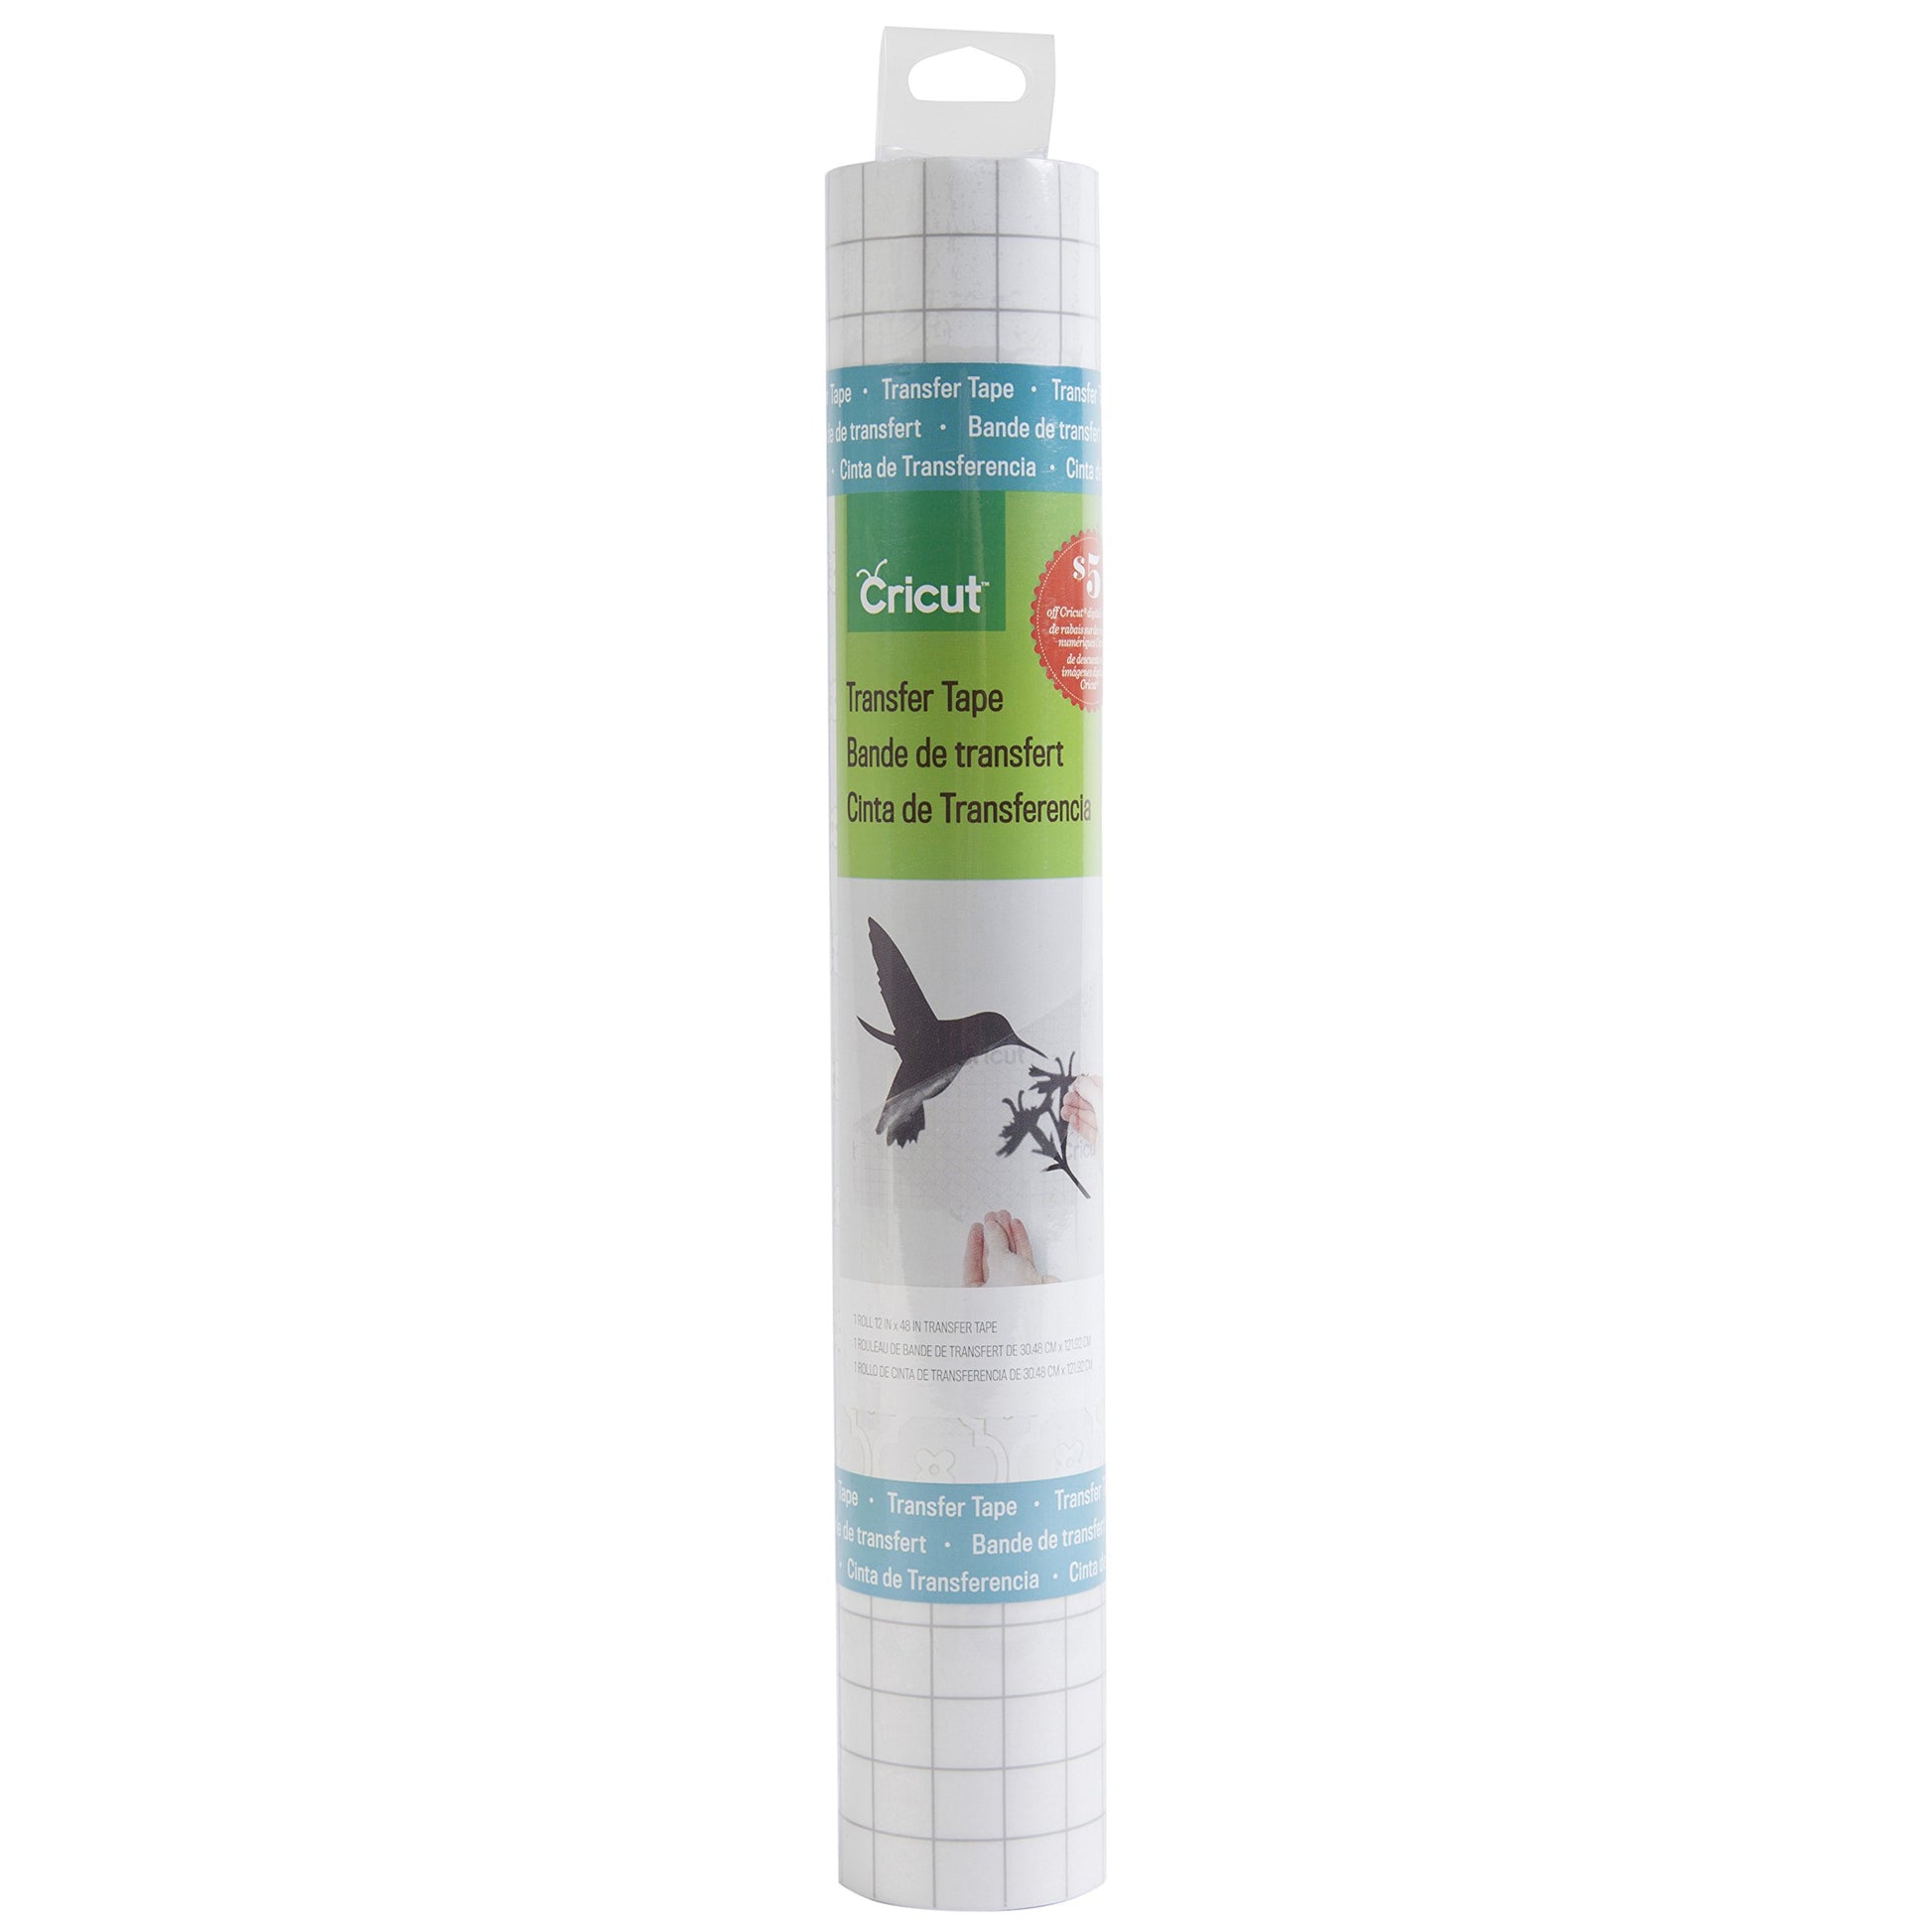 Cricut Transfer Tape - 1ft x 21ft - Easy Transfer Adhesive Sheet for Vinyl  Projects - Compatible with Most Vinyl Types - Clear